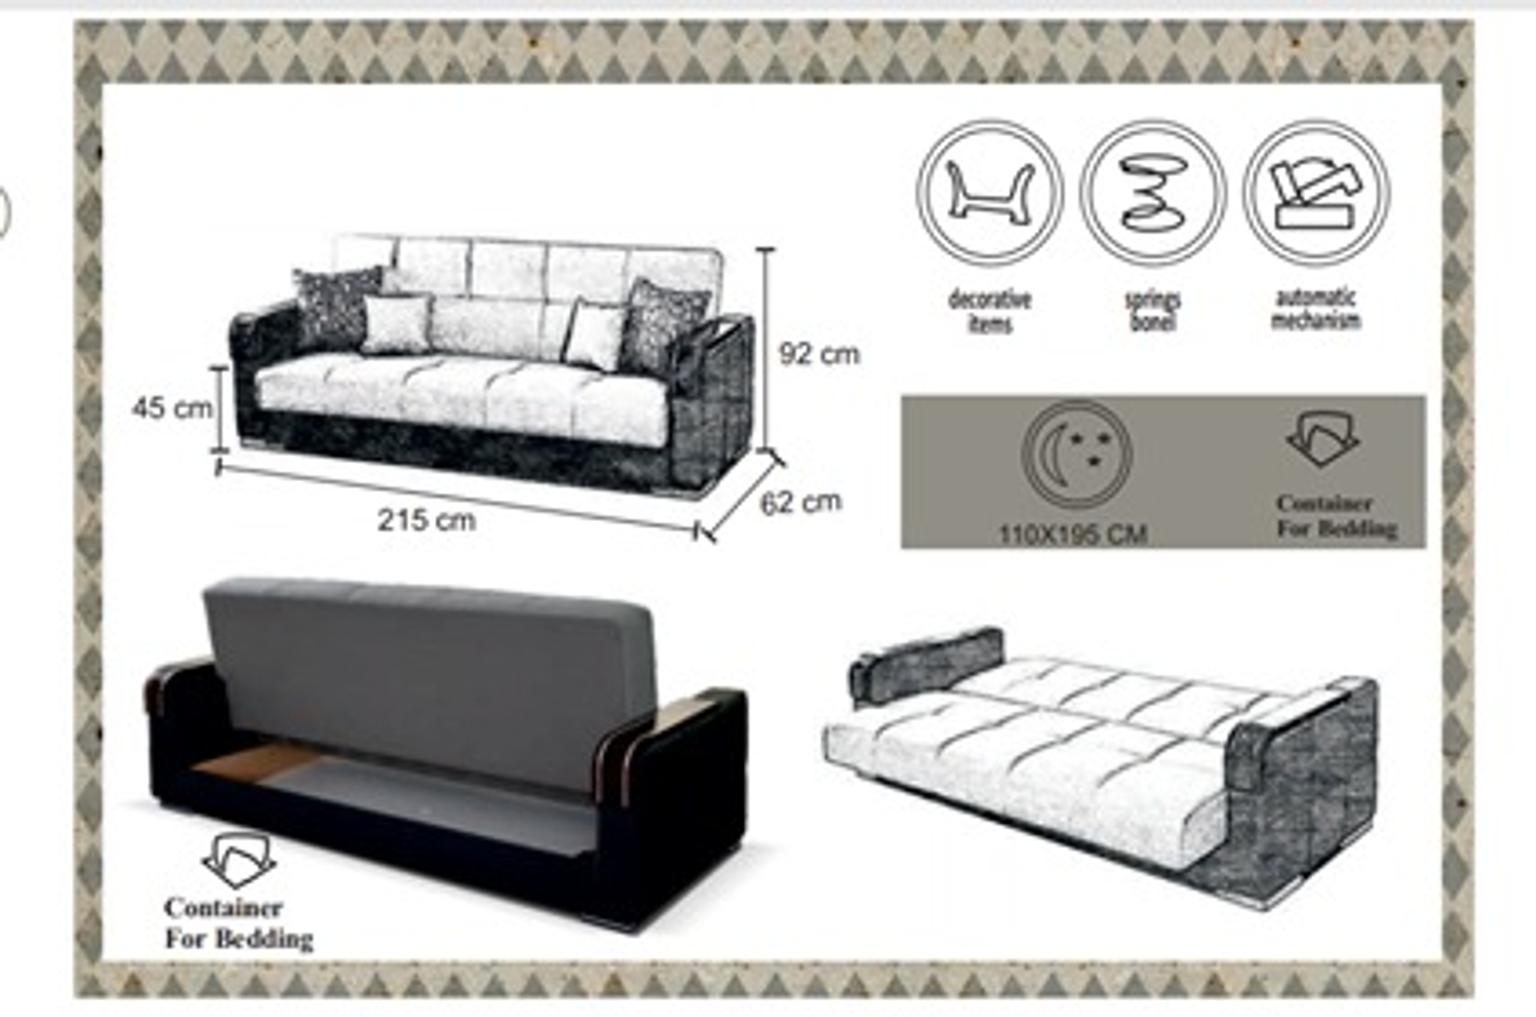 Fabric Malta 3 Seater Sofabed In E1 0ae, What Is The Length Of A 3 Seater Sofa Bed